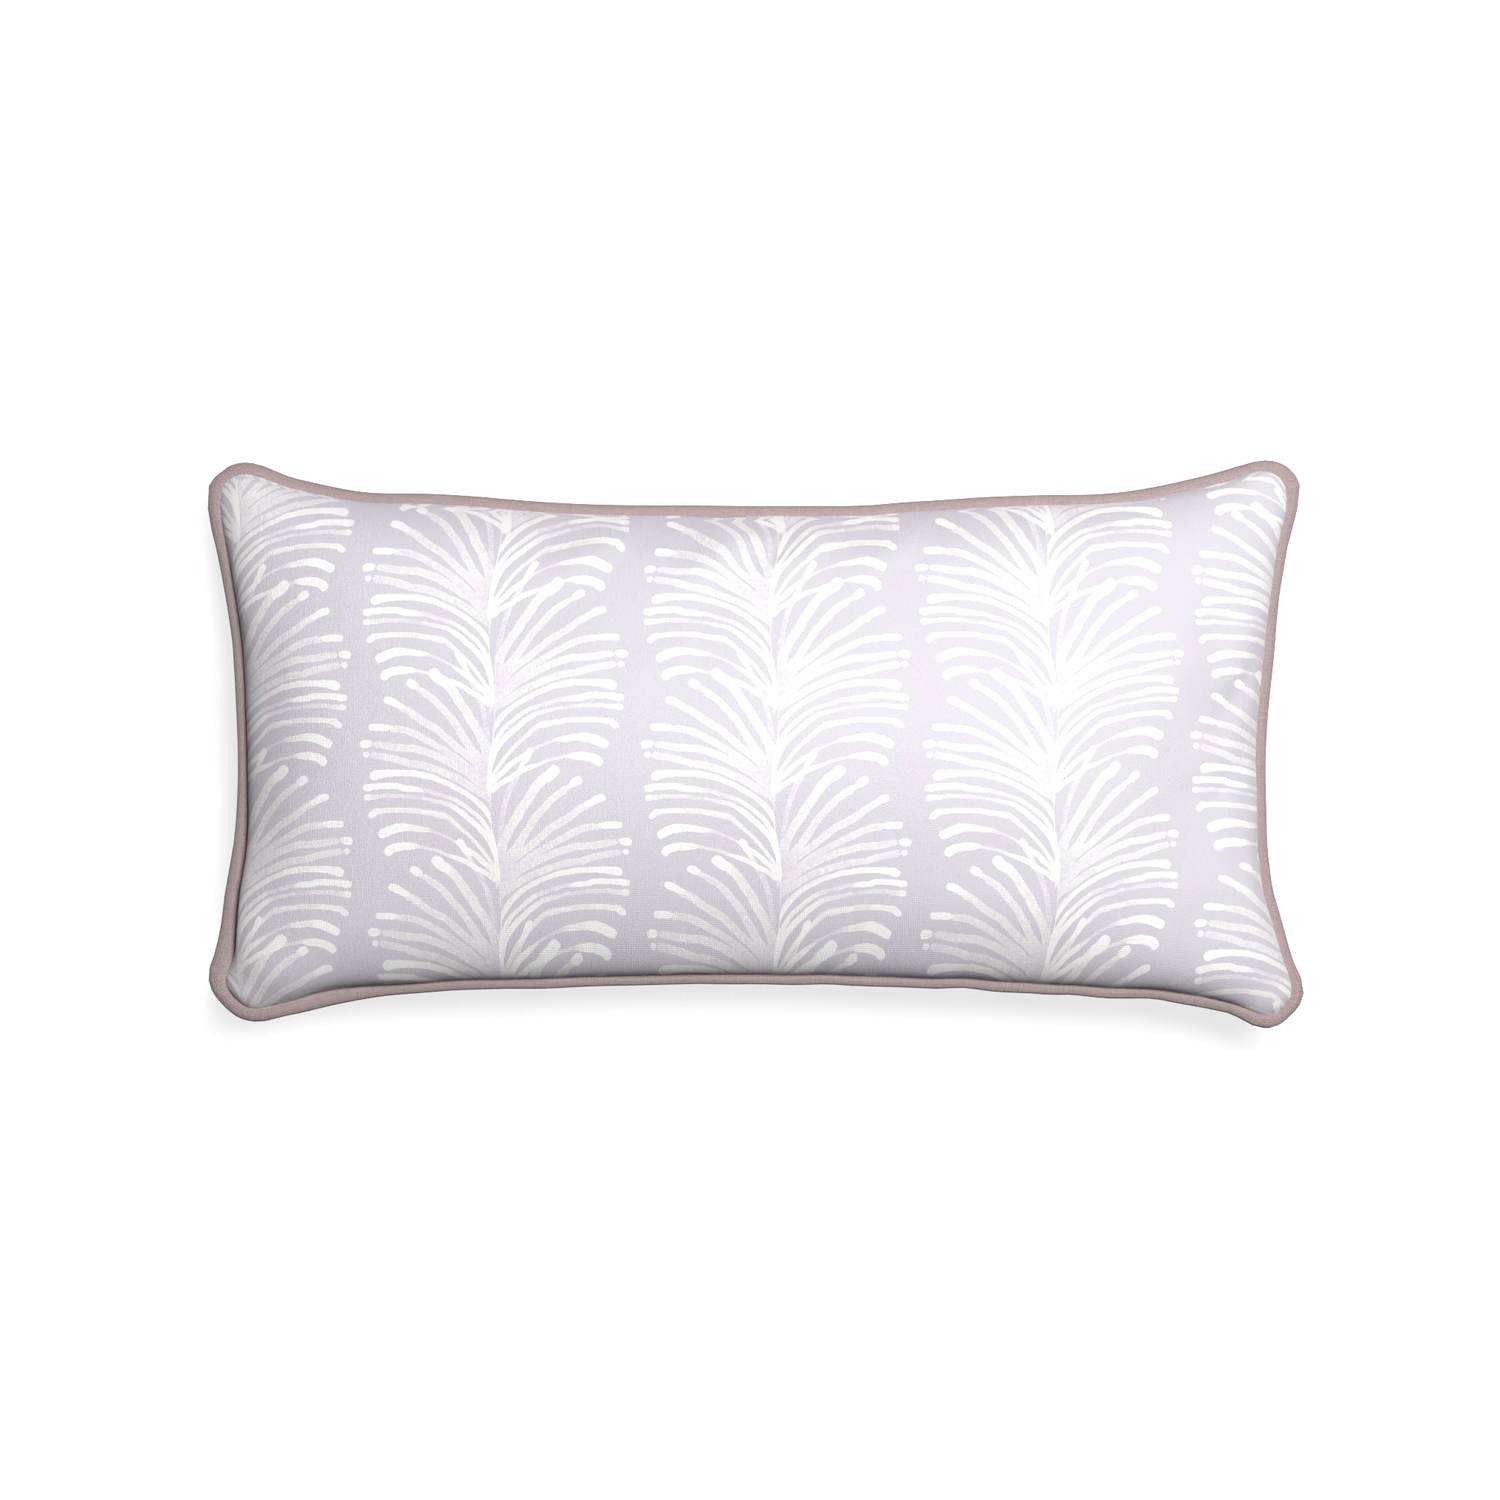 Midi-lumbar emma lavender custom lavender botanical stripepillow with orchid piping on white background